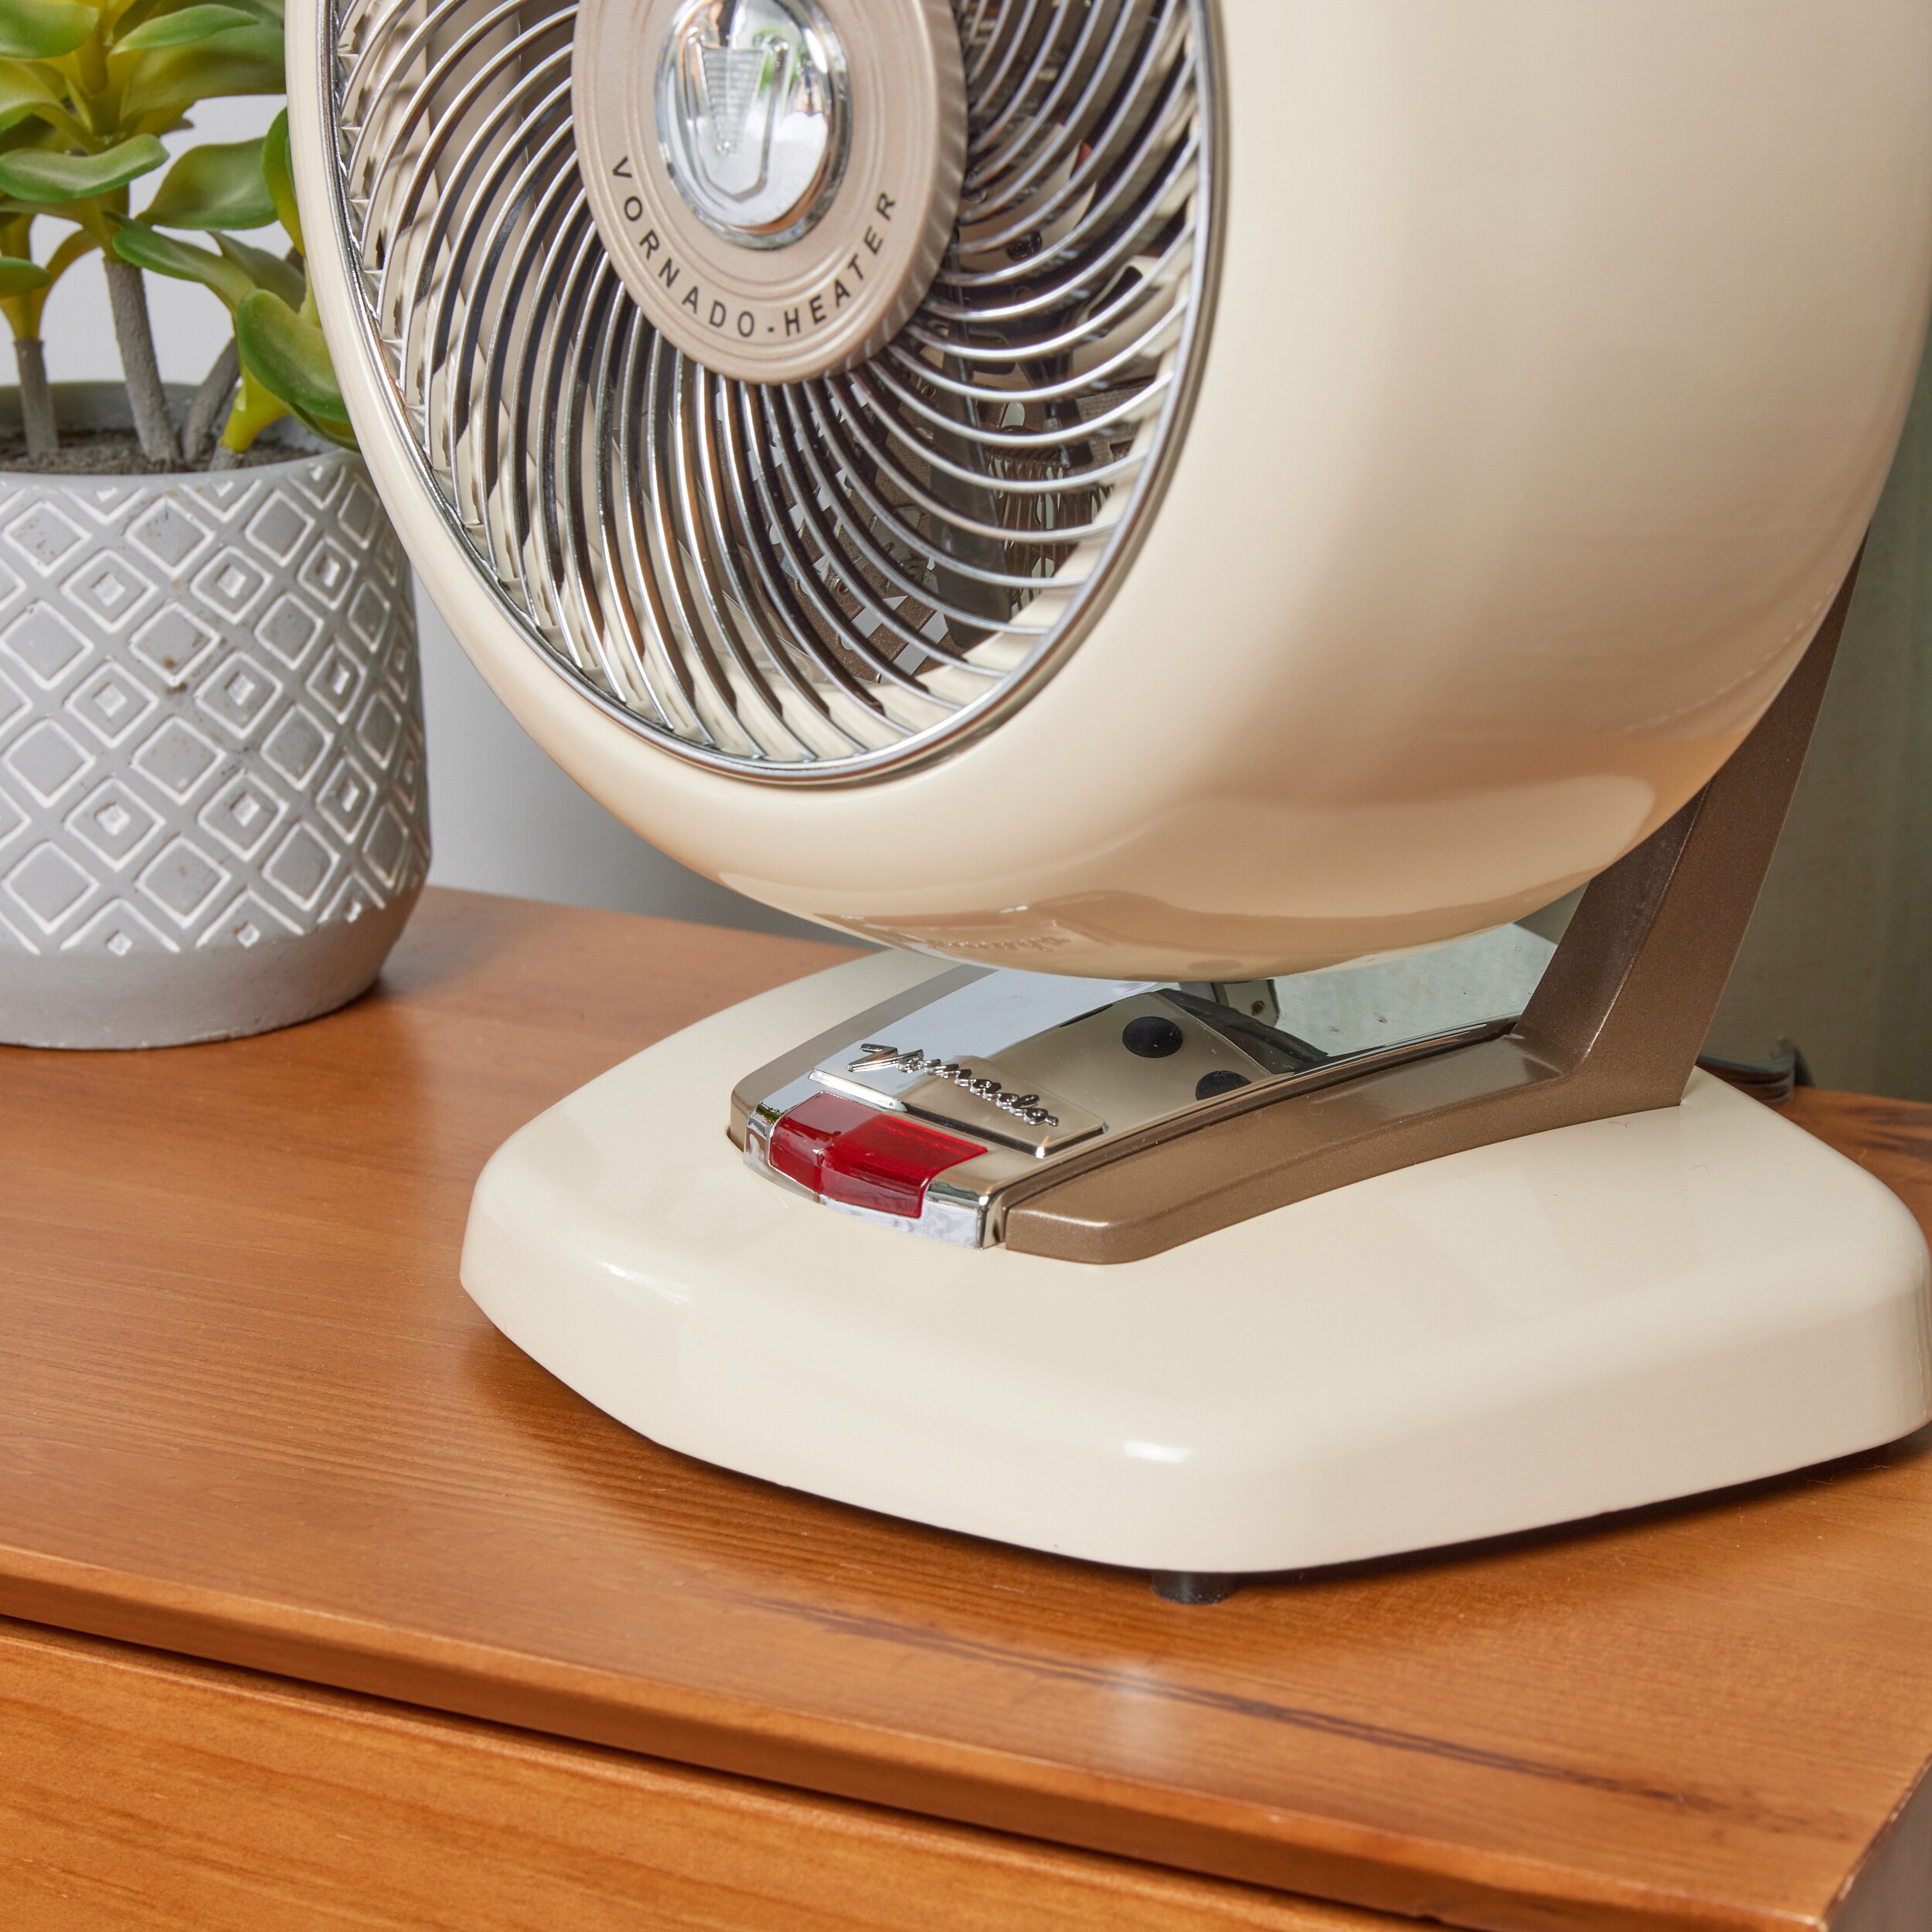 Vornado 1500-Watt Fan Utility Indoor Electric Space Heater with Thermostat